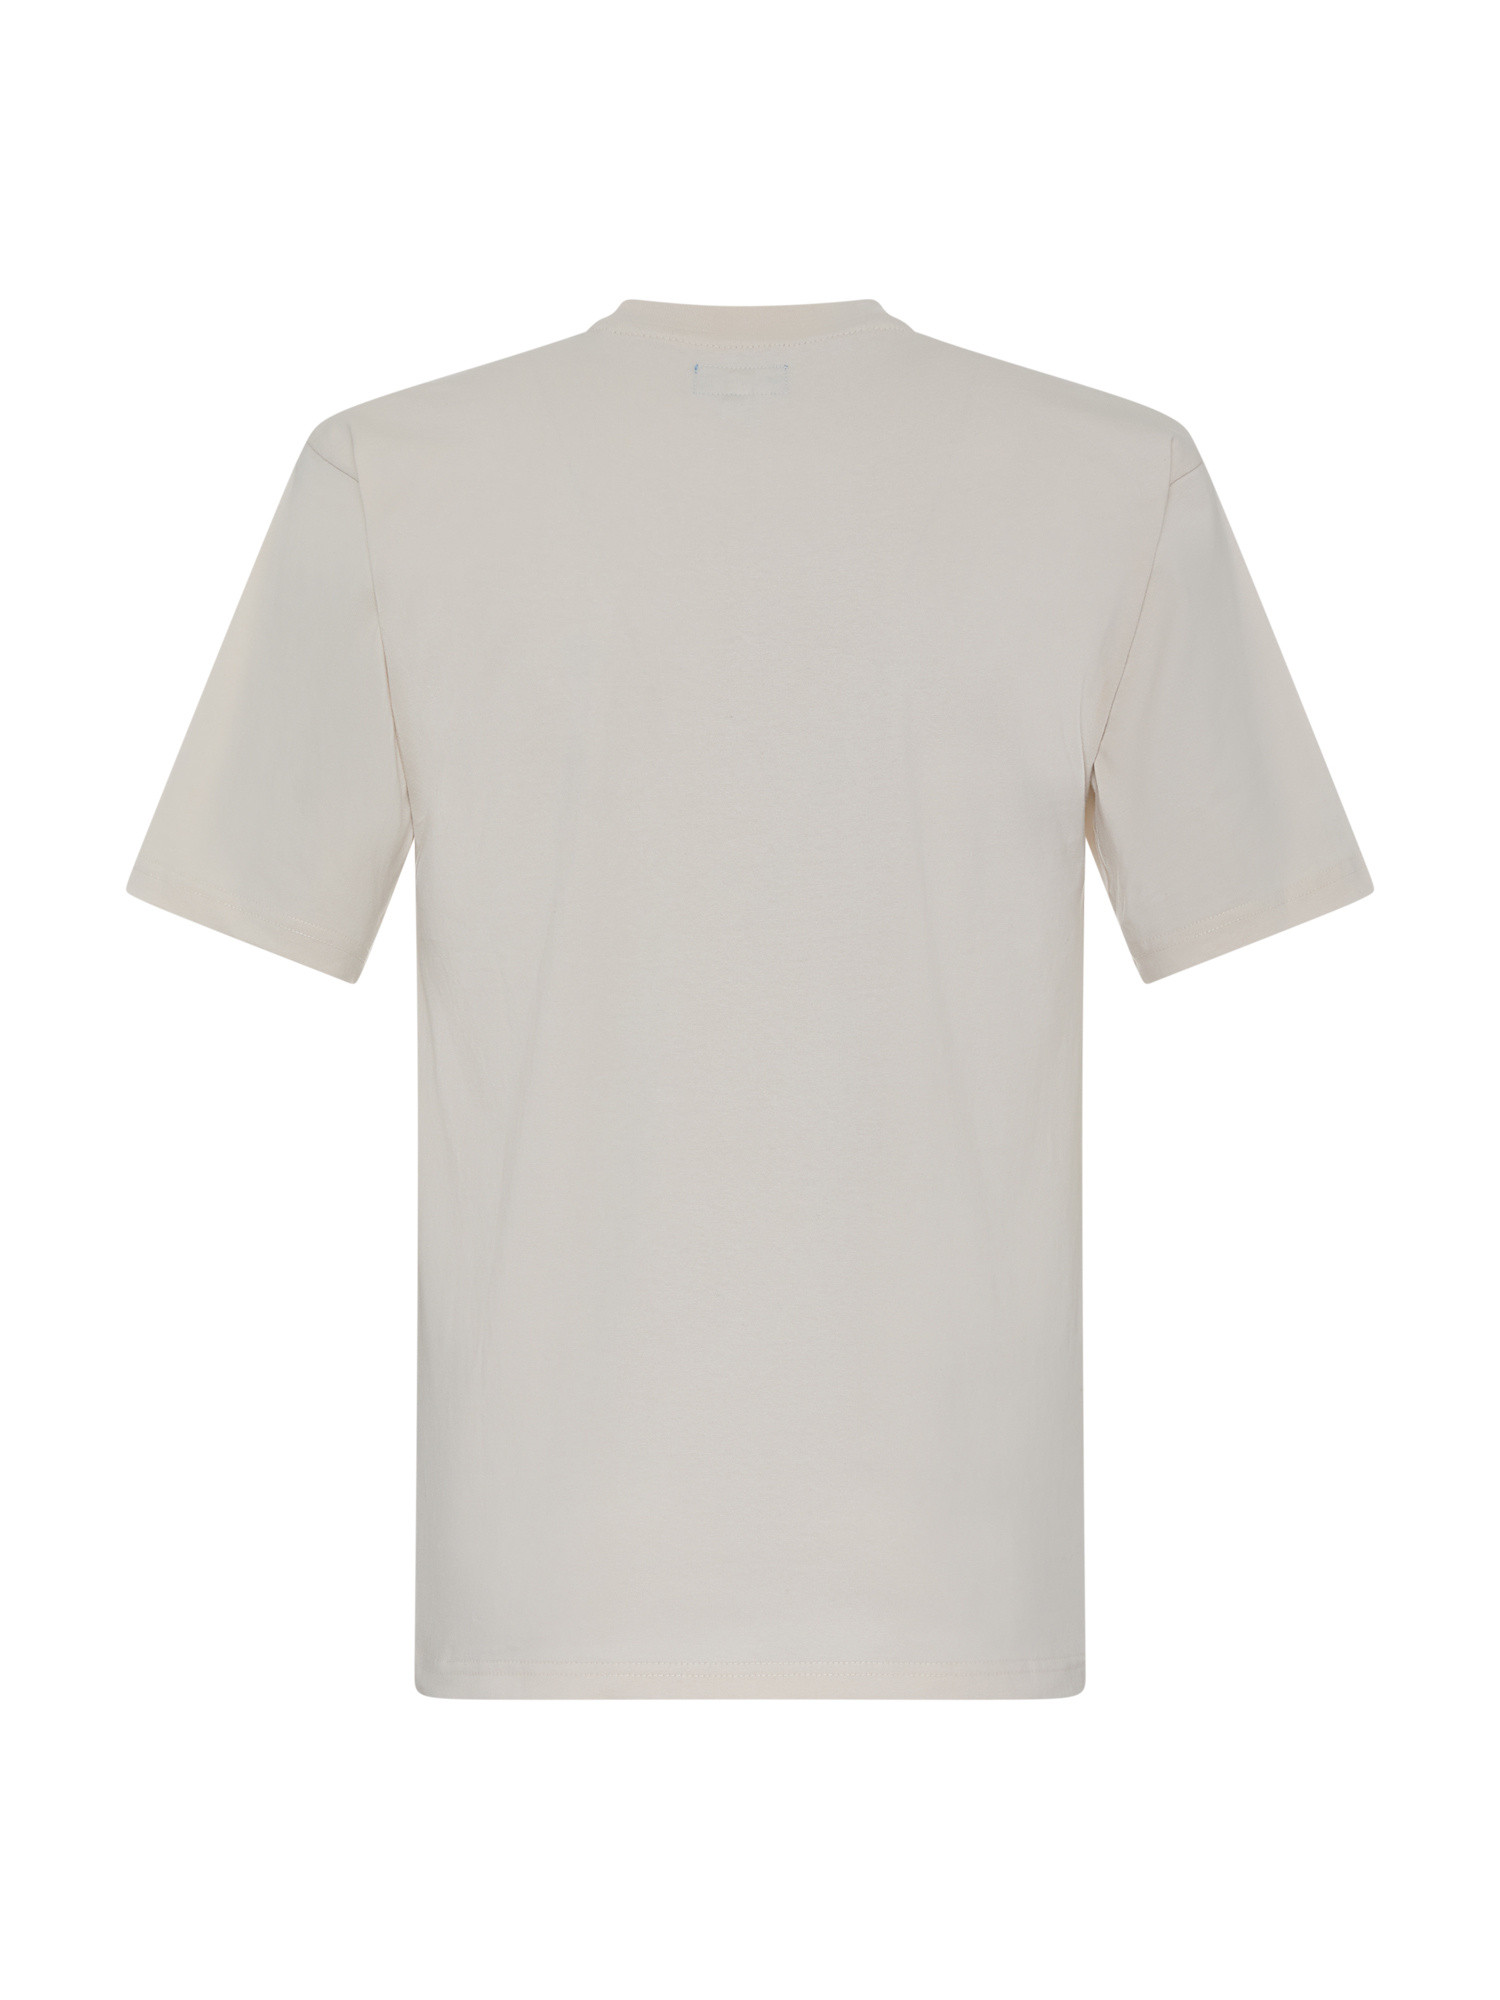 Market - T-shirt in cotone con stampa, Beige, large image number 1